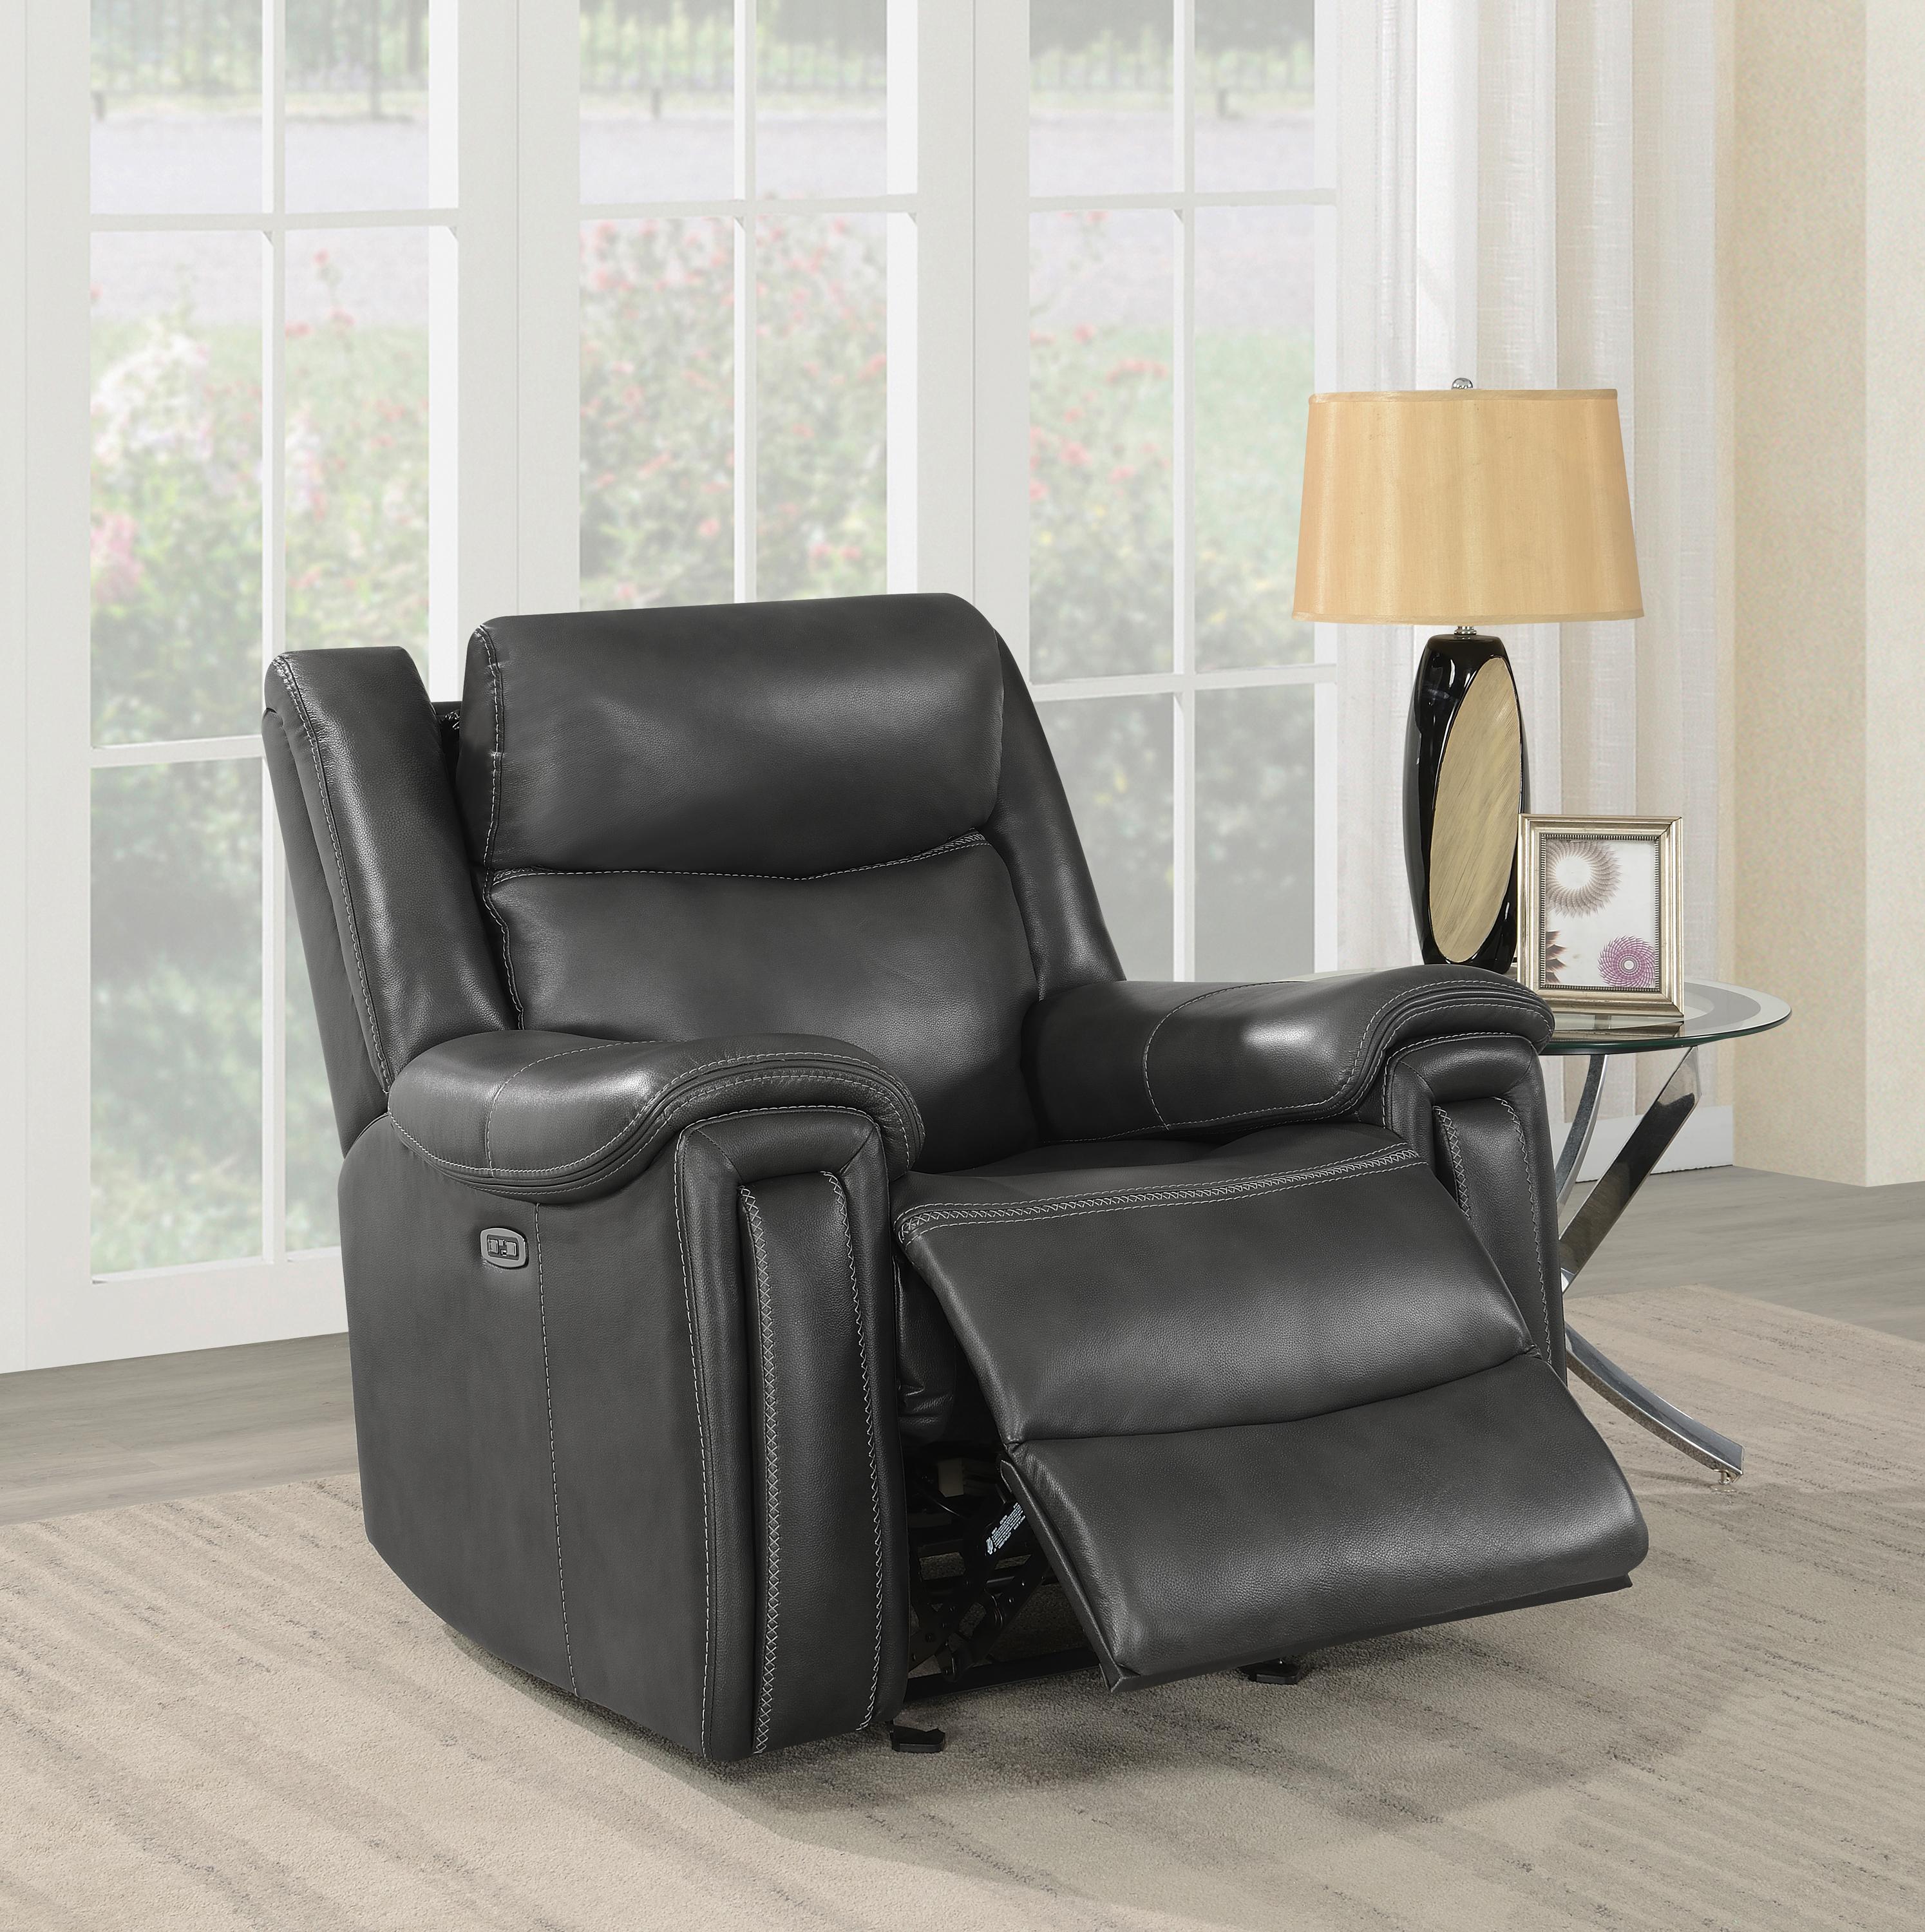 

    
Transitional Hand Rubbed Charcoal Leather Power Sofa Set 3pcs Coaster 609321PPI-S3 Shallowford
